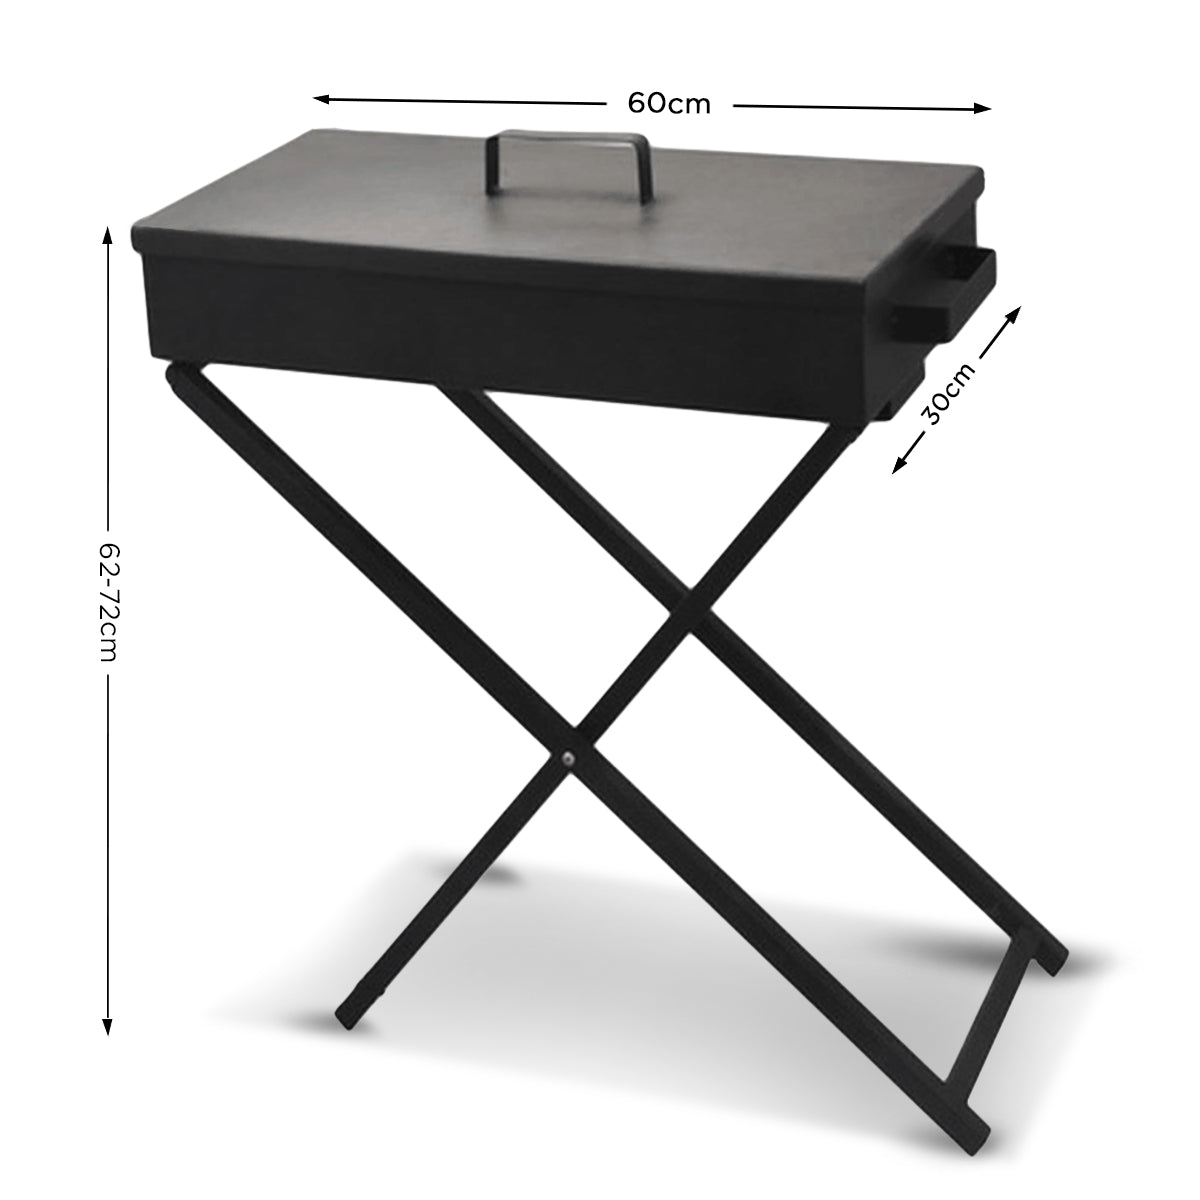 Charcoal BBQ Grill - Adjustable Height